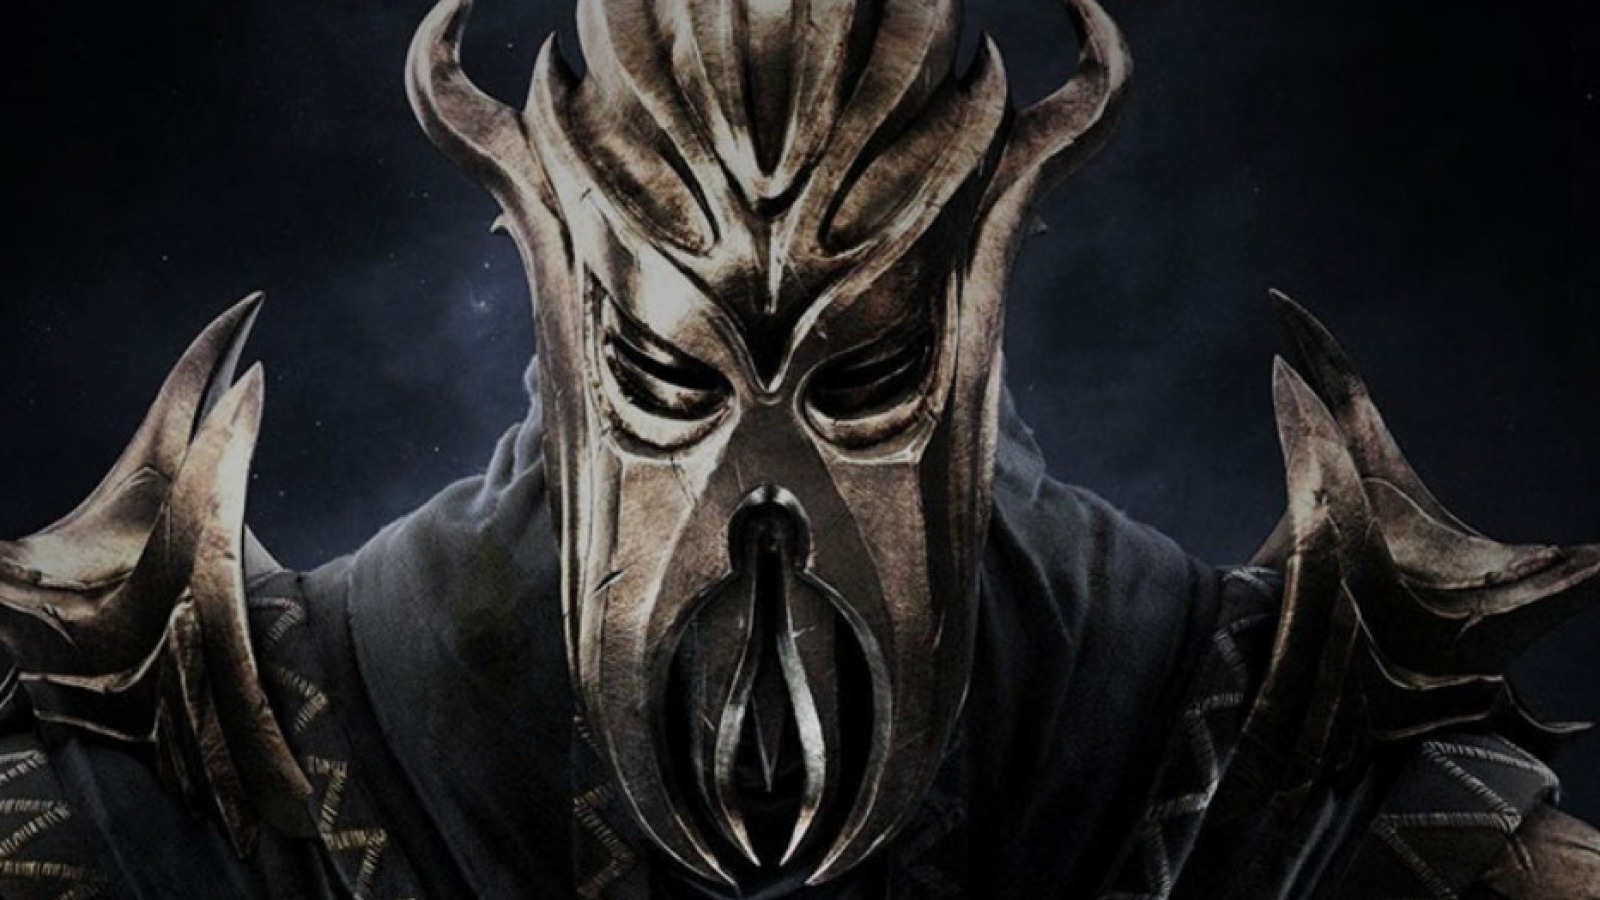 who will you play as in the elder scrolls 6